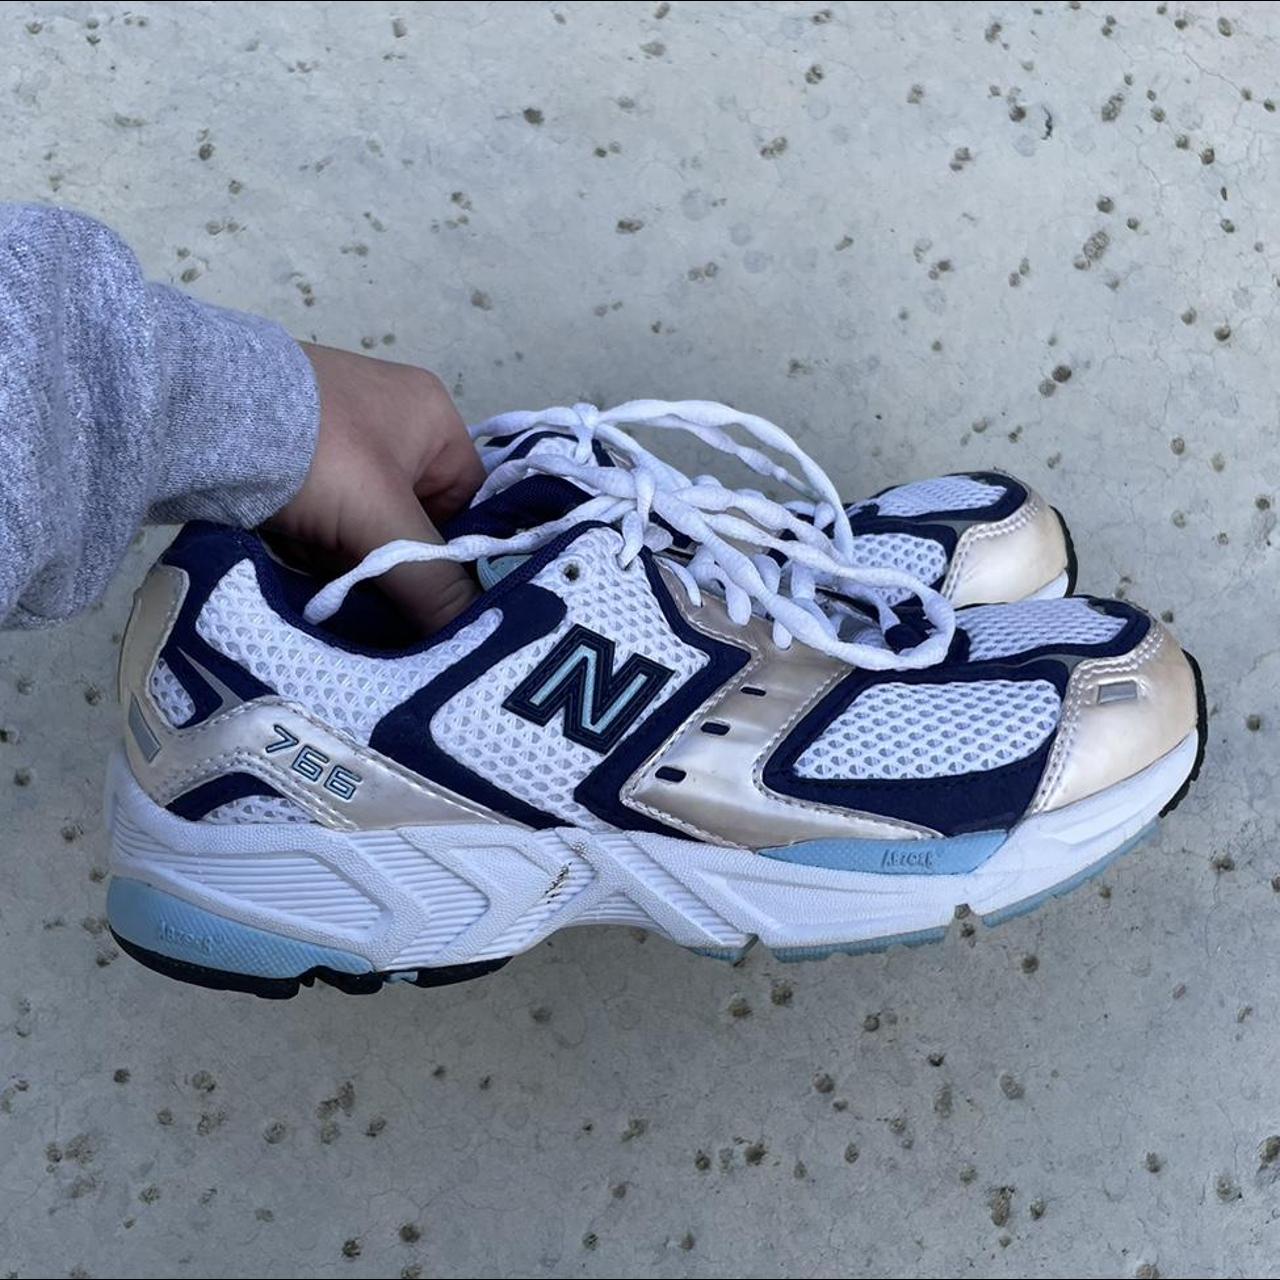 New Balance Women's White and Blue Trainers (3)